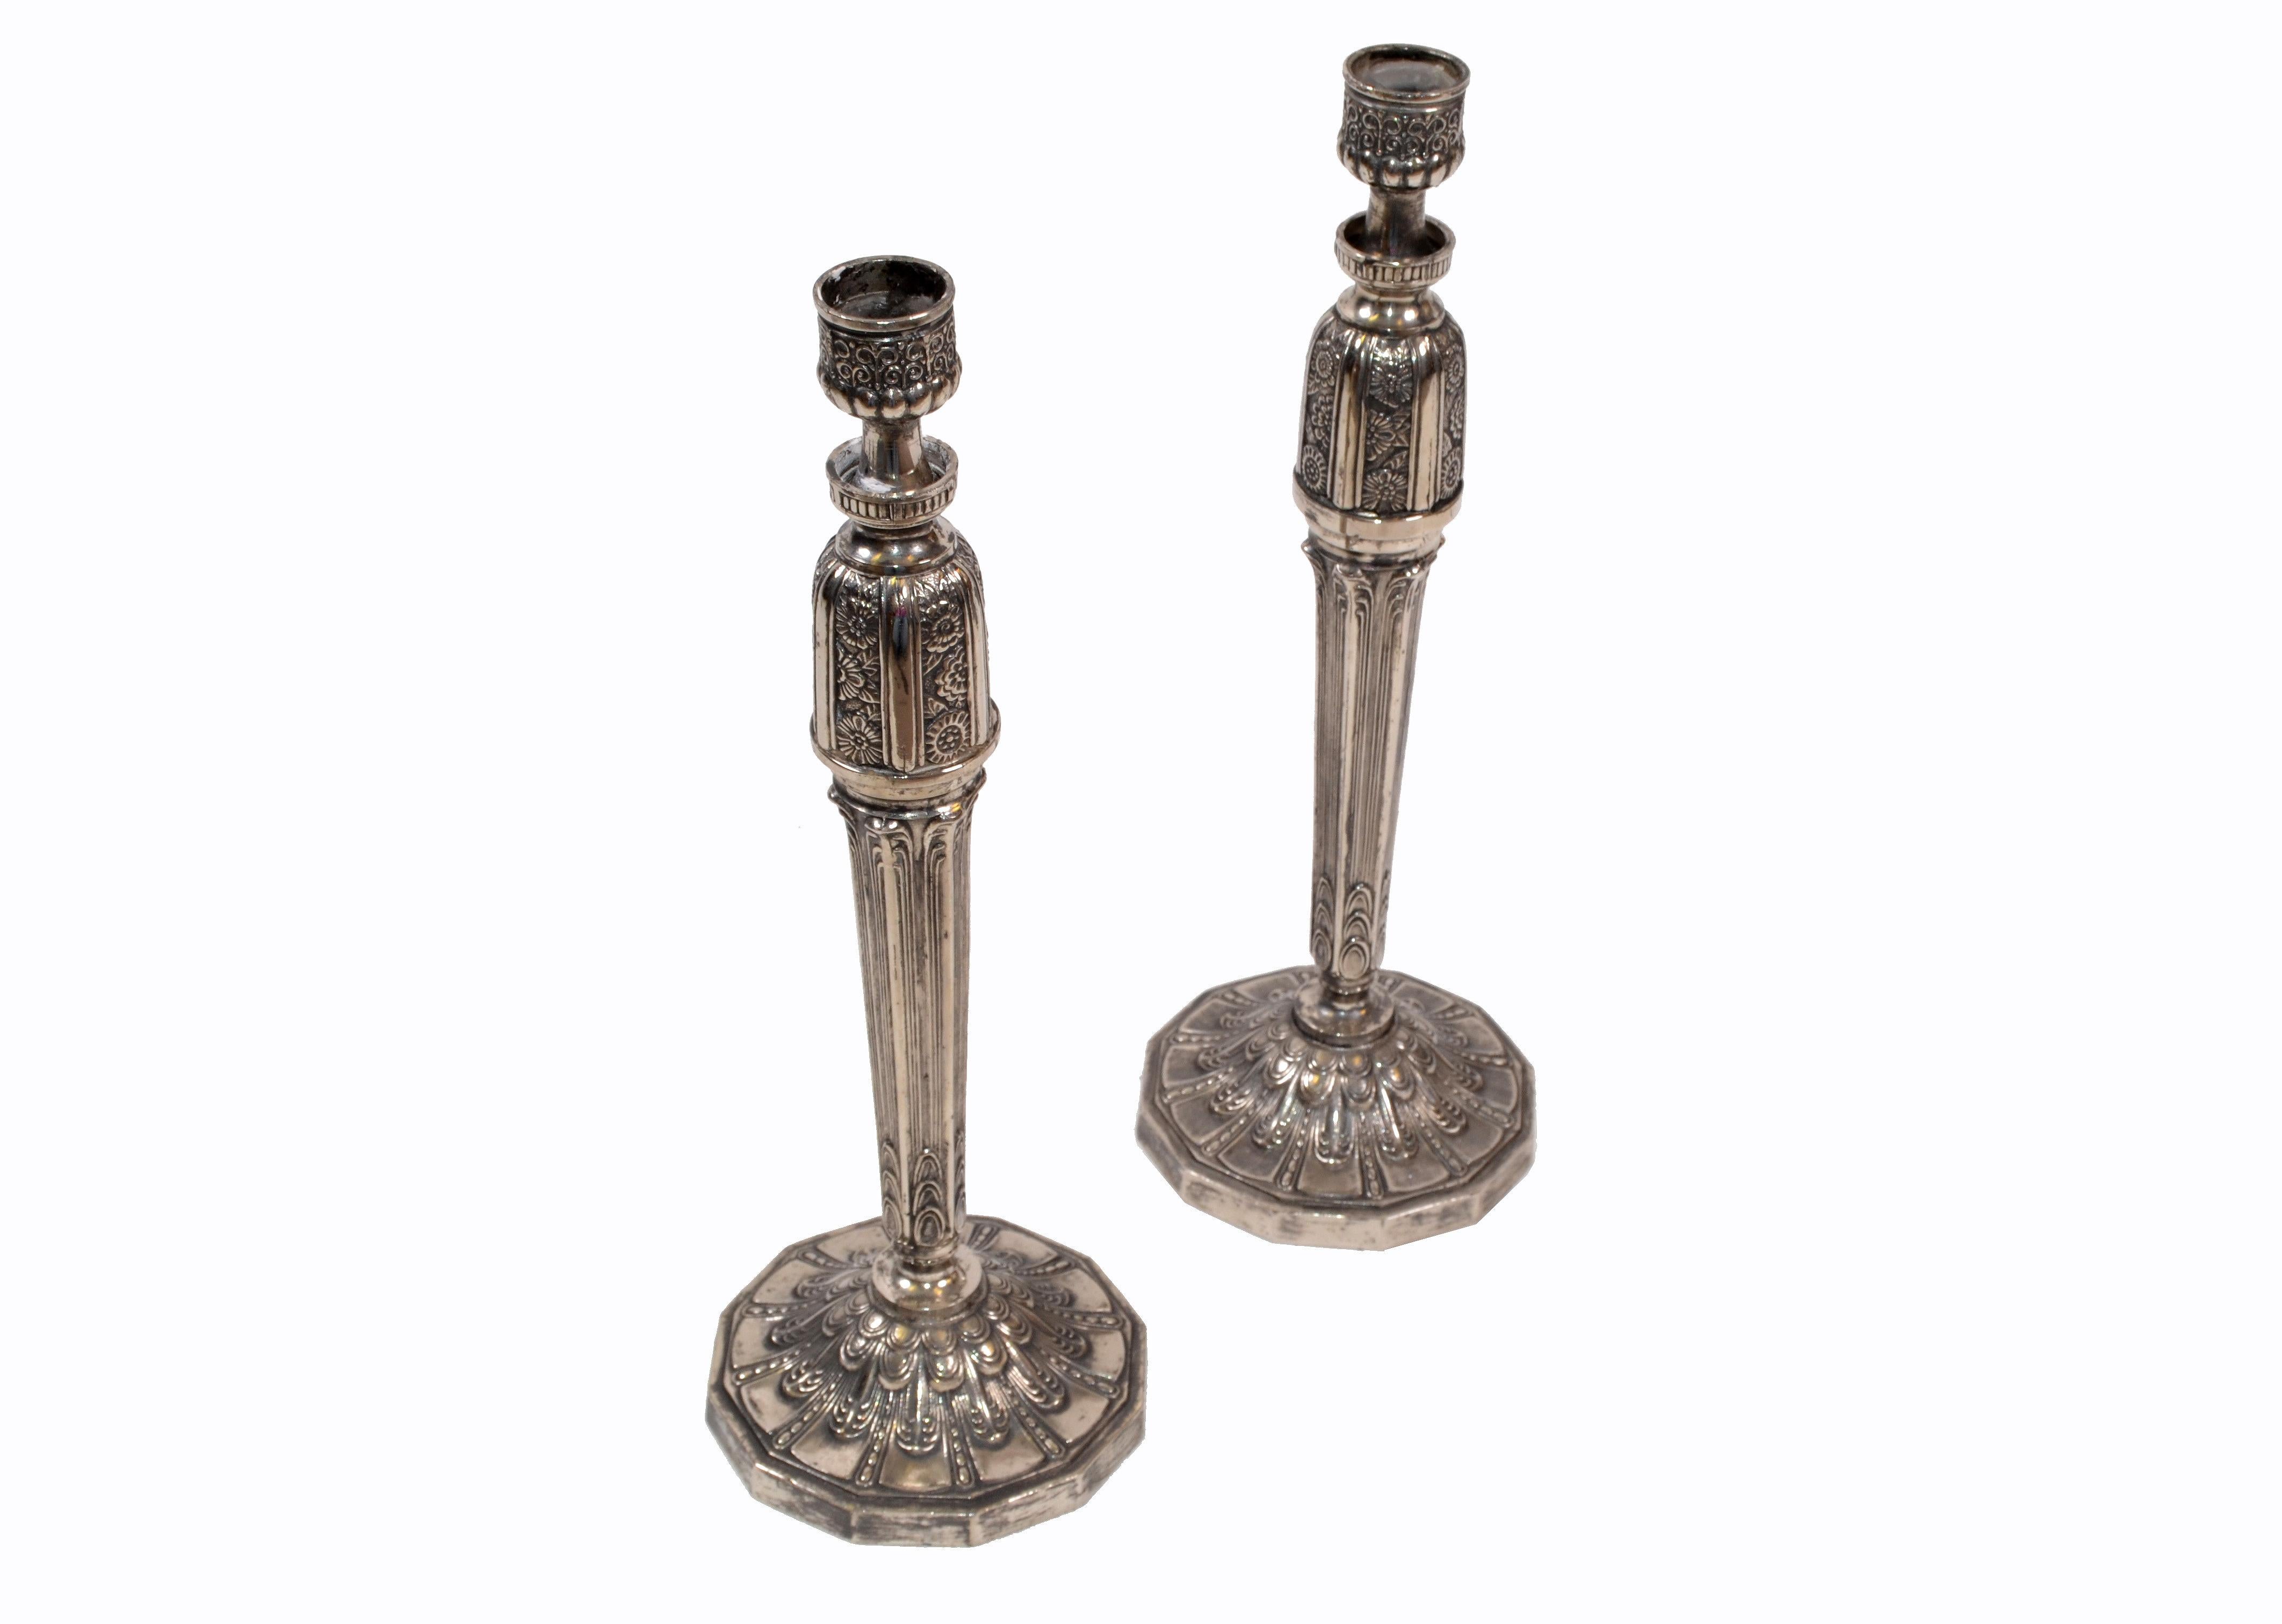 A pair of heavy George III Style silver plated candleholders or candelabras.
Tarnished due to age and use.
Diameter of the base: 4.75 inches.